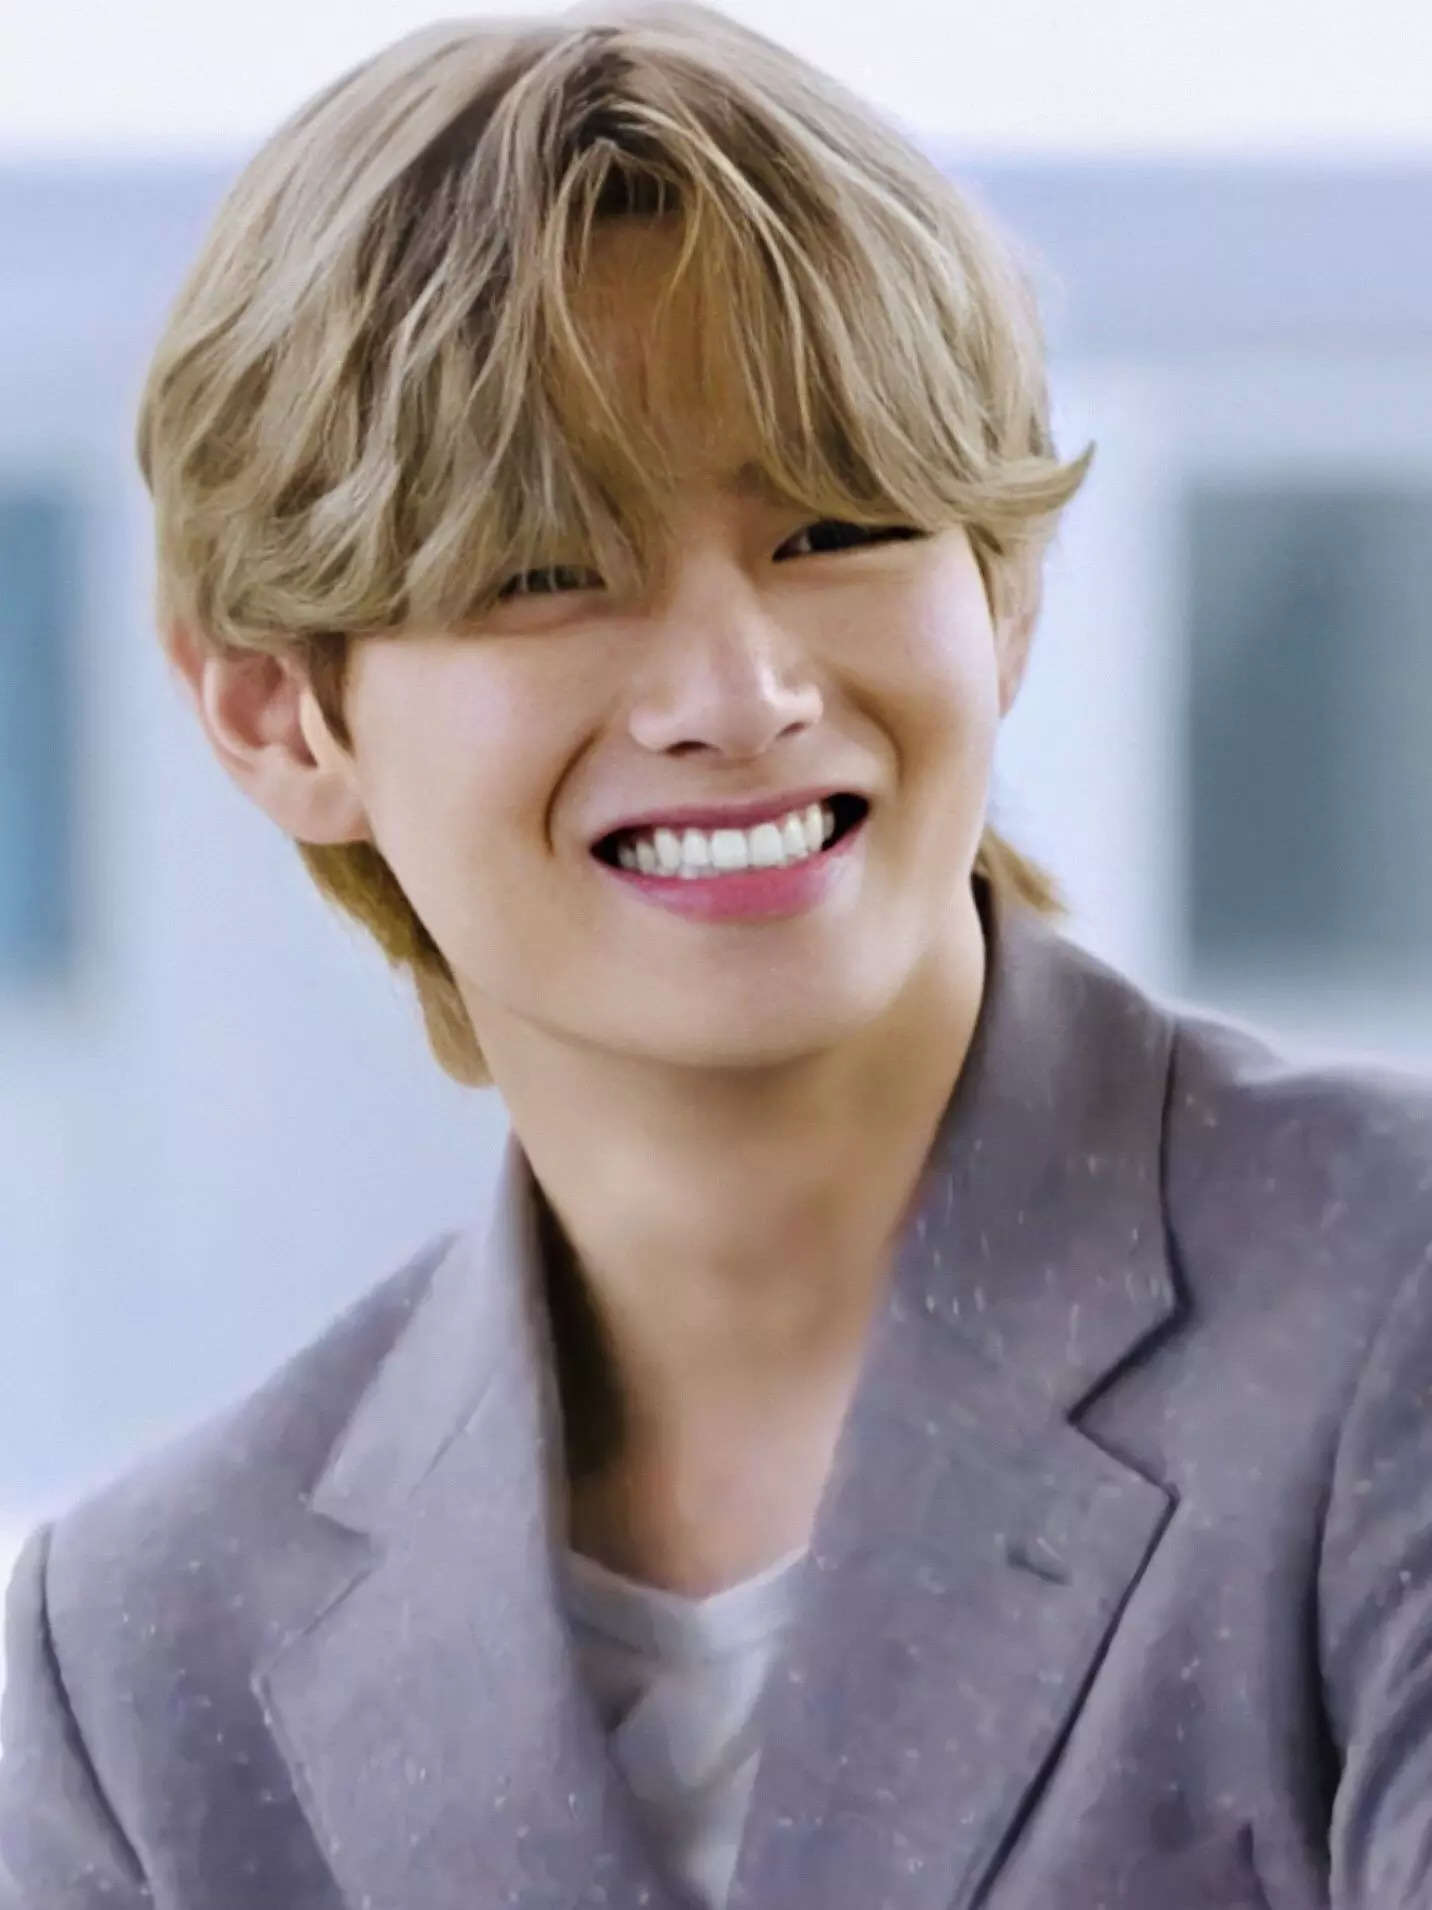 Bts V Has The Cutest Boxy Smile To Brighten Your Day Take A Look